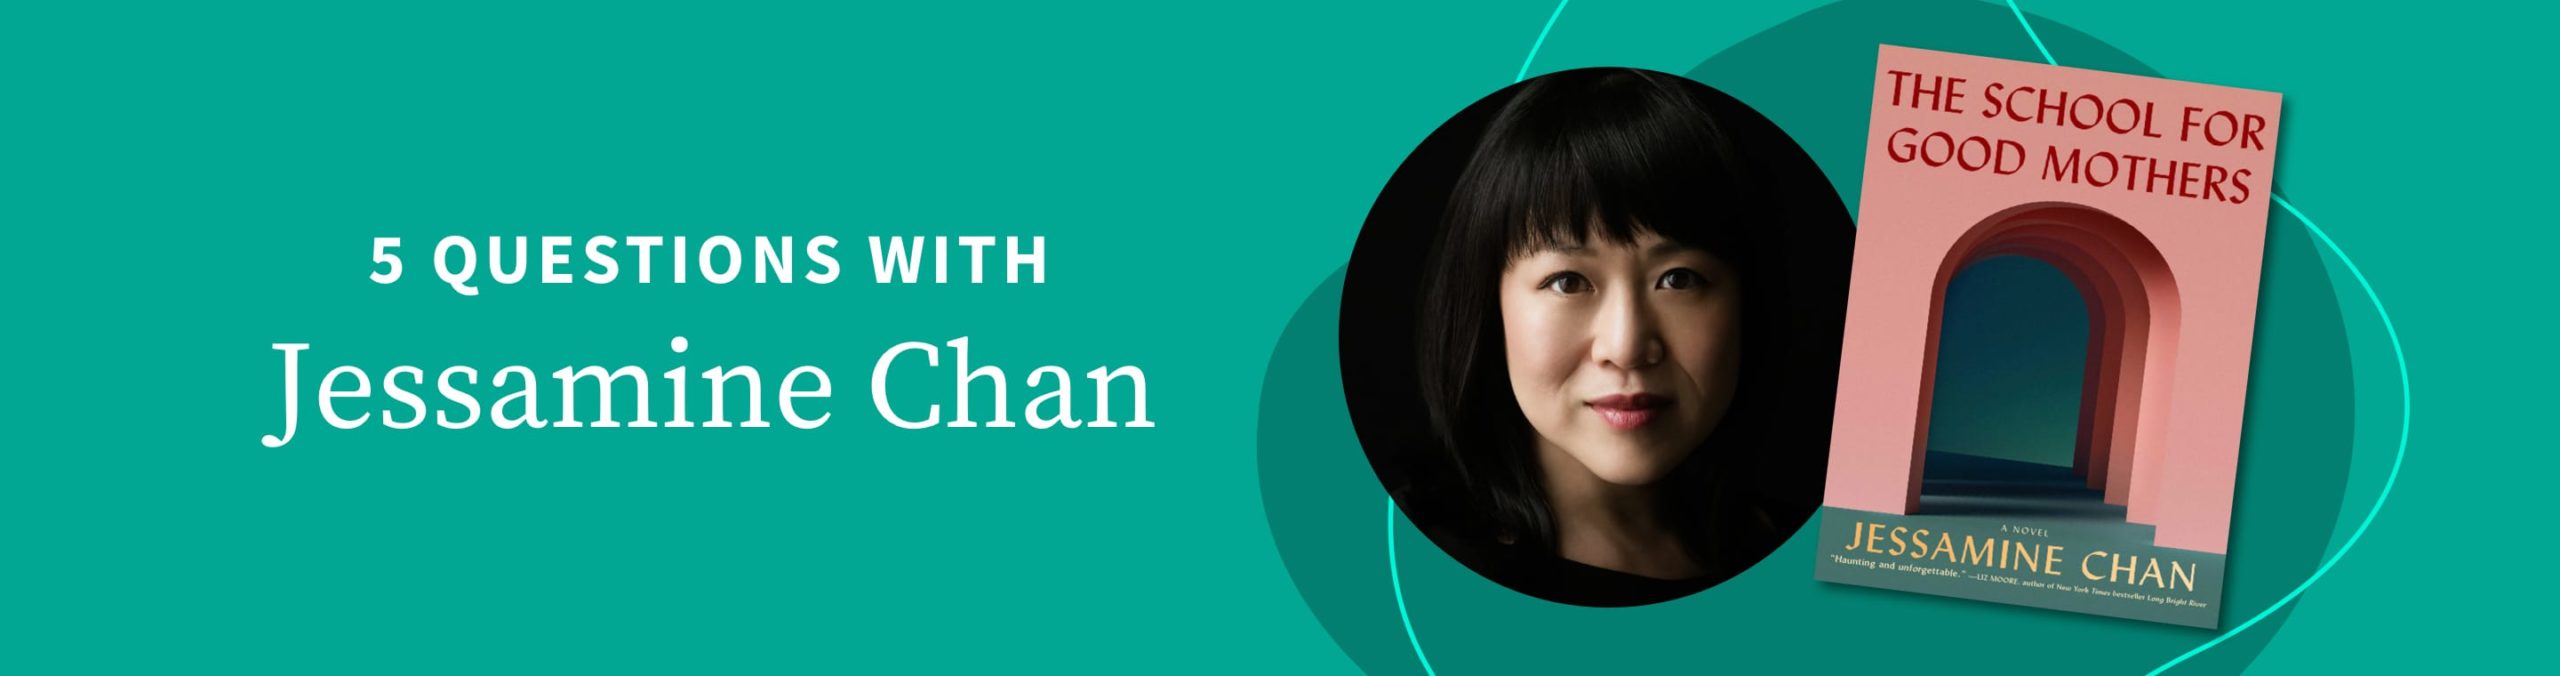 5 questions with Jessamine Chan